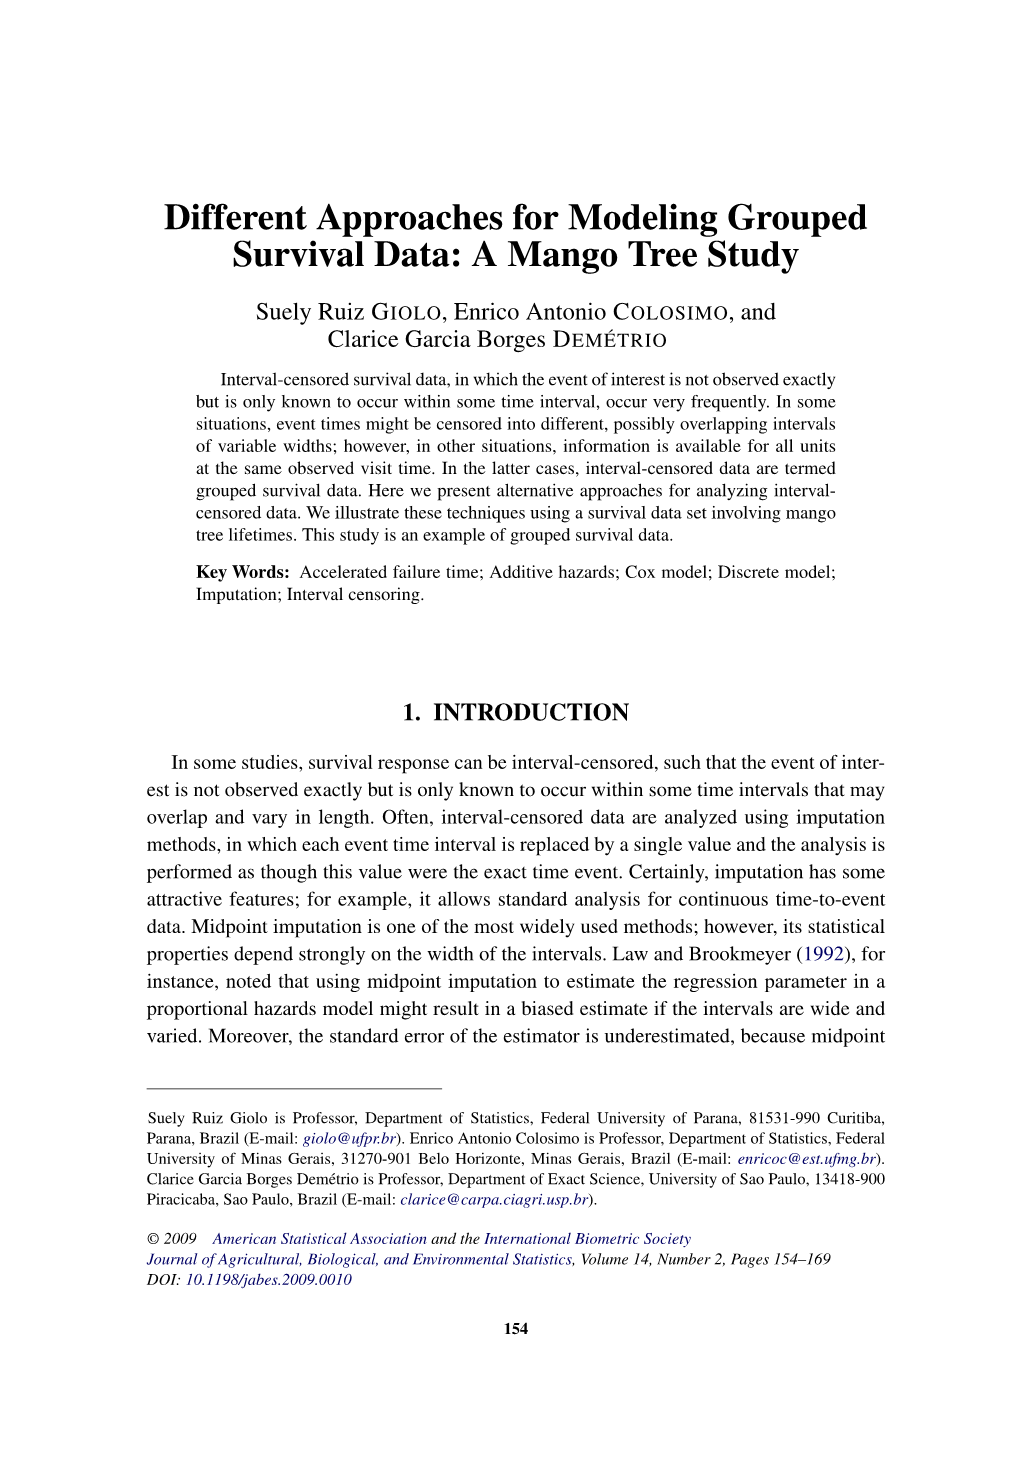 Different Approaches for Modeling Grouped Survival Data: a Mango Tree Study